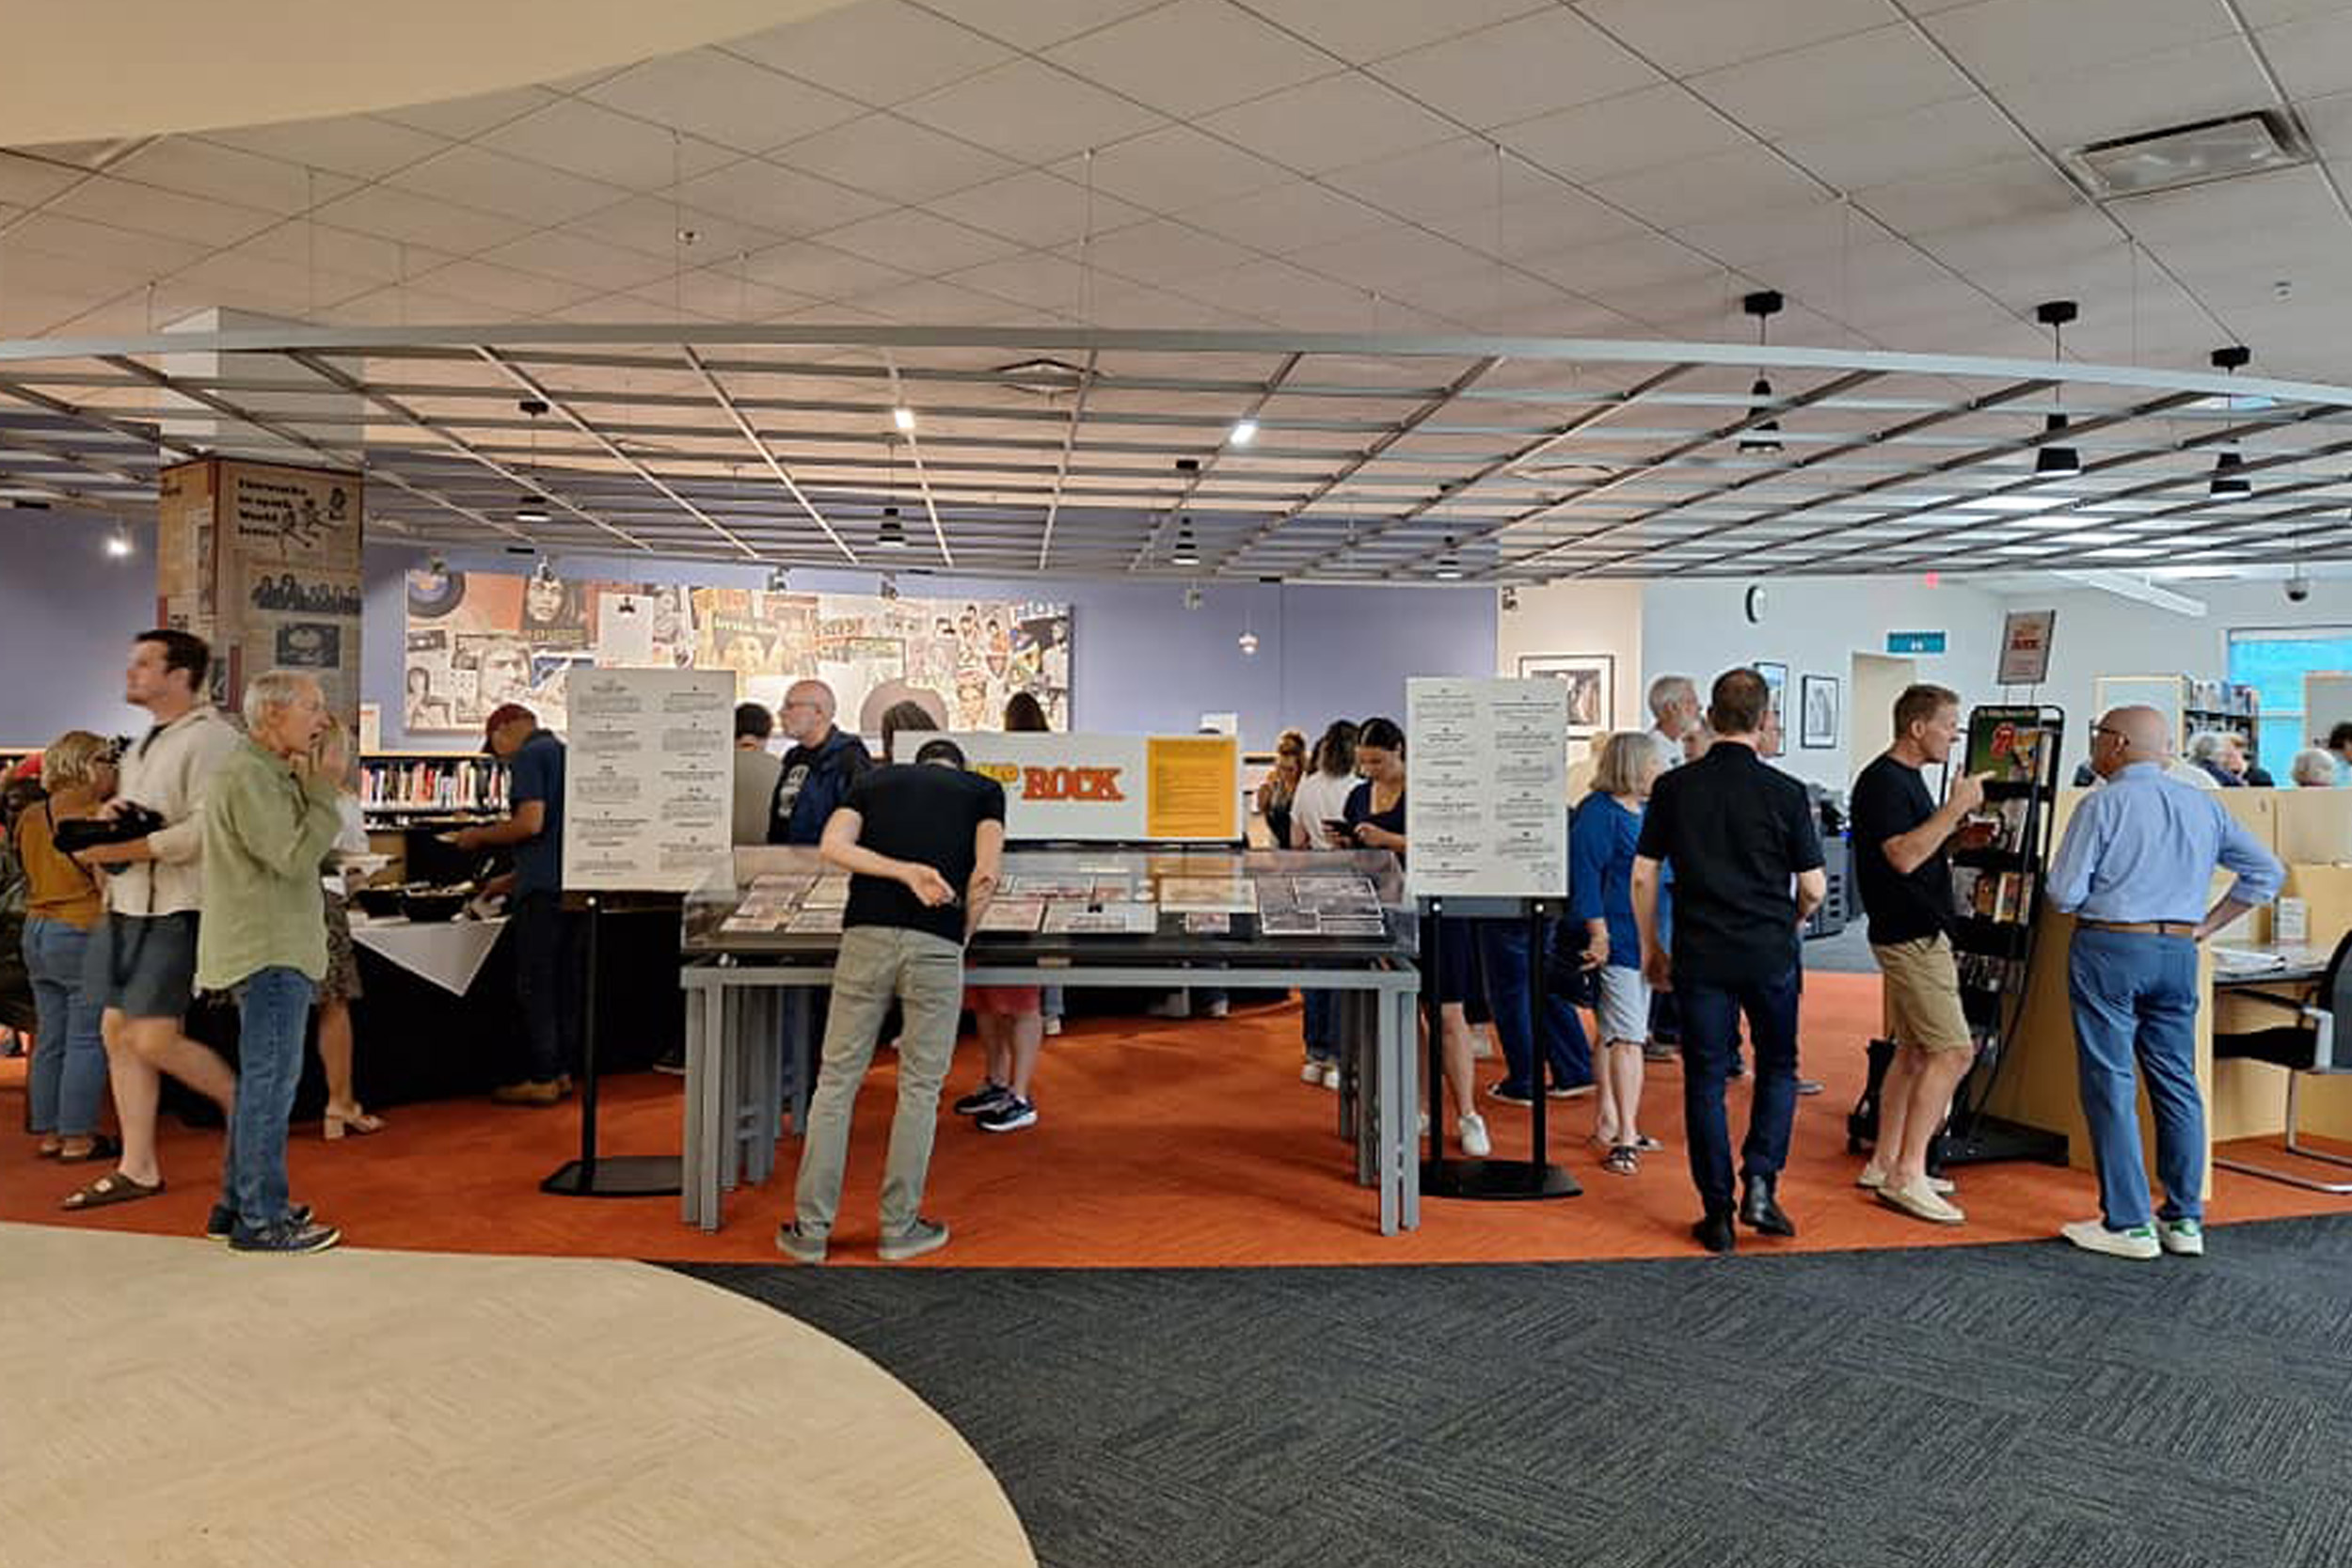 You can go your own way: Visitors to the World Series of Rock exhibit could mix and mingle, check out the memorabilia, or grab a bite from the appetizers table in the Rock & Roll Hall of Fame Library and Archives.